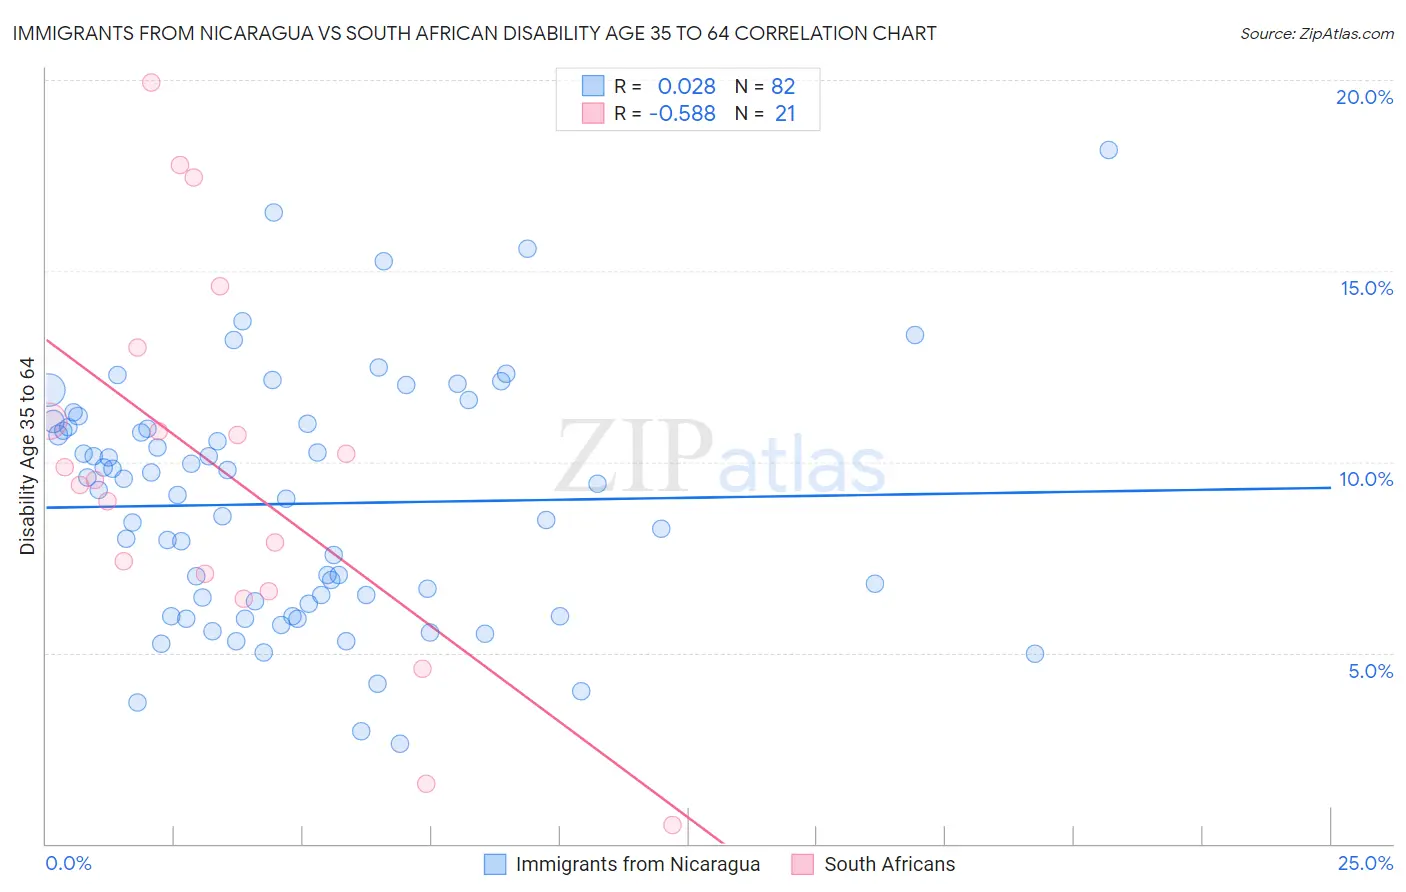 Immigrants from Nicaragua vs South African Disability Age 35 to 64